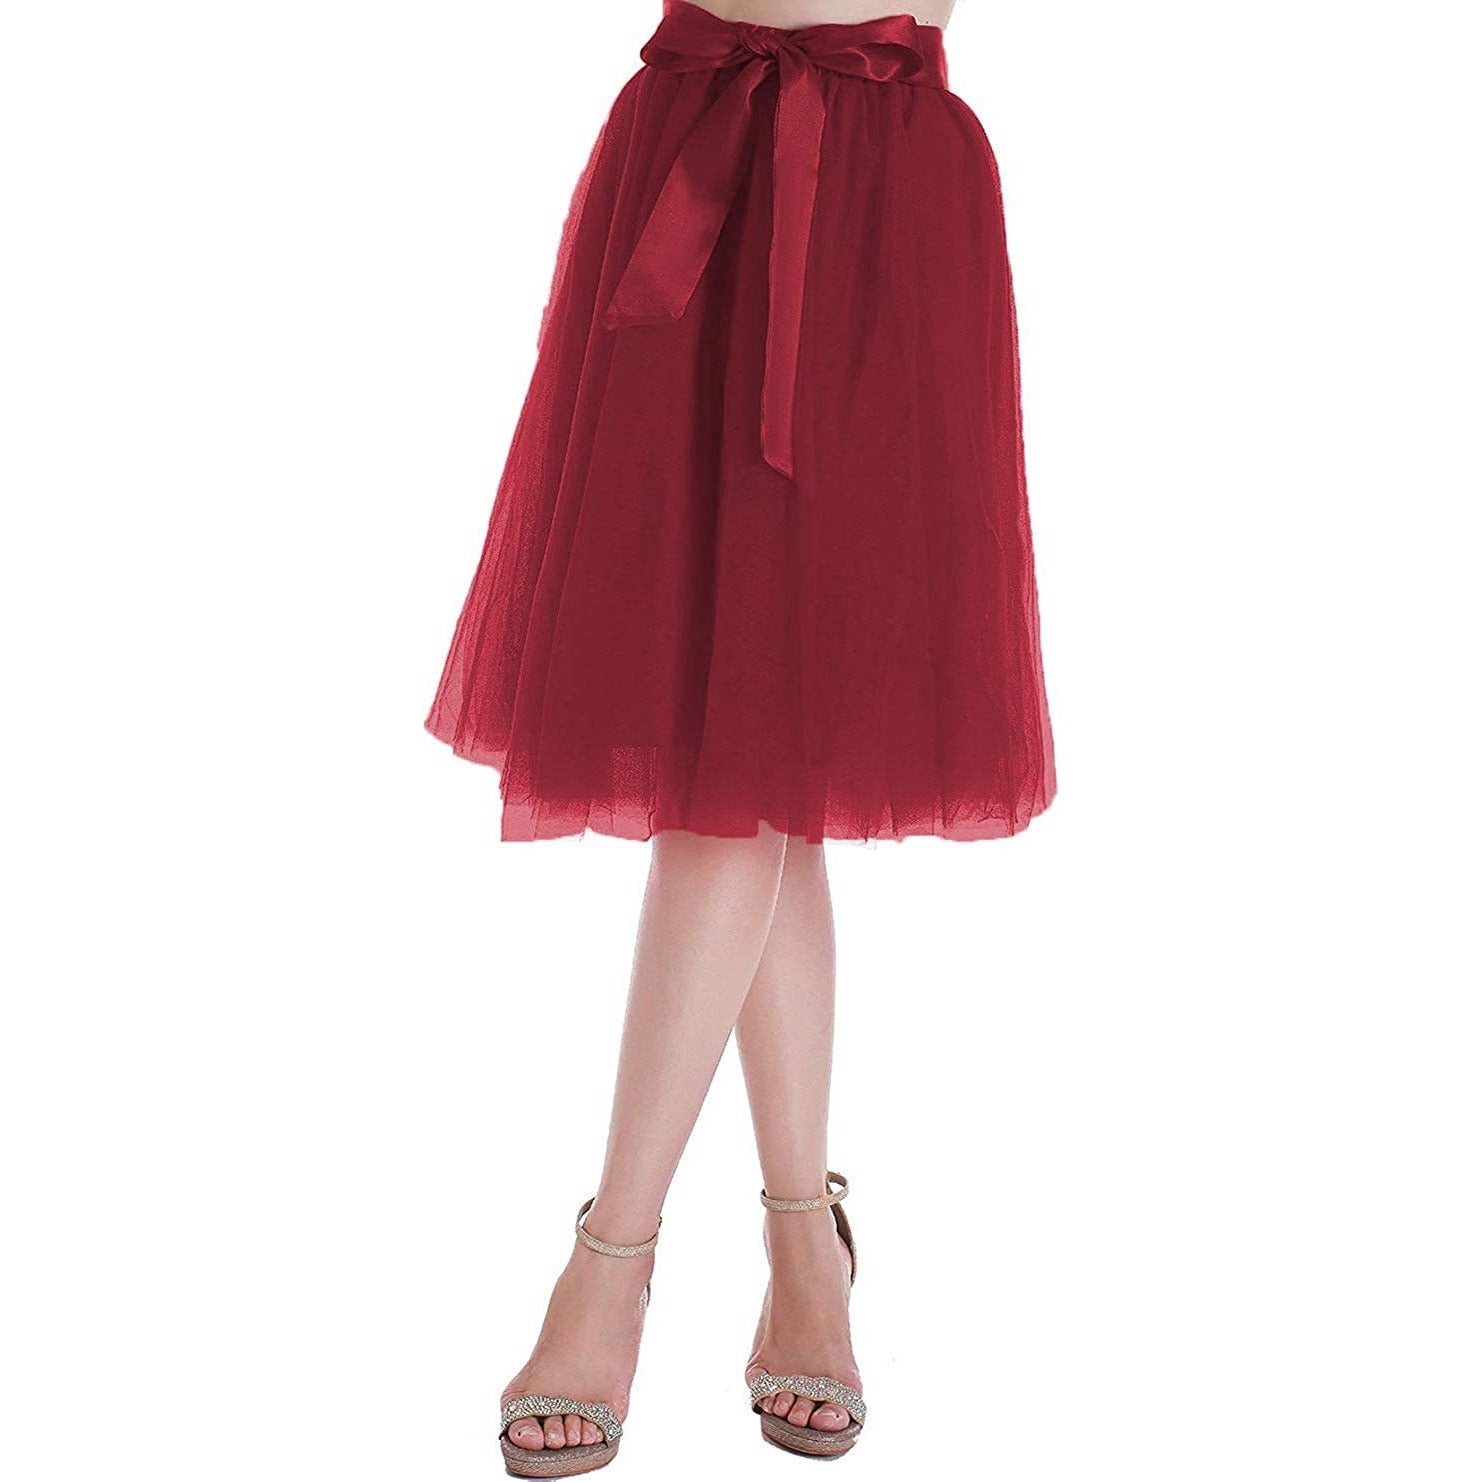 Dancina Women's A-Line Tea Length Midi Tulle Skirt - Regular and Plus Size in Wine Red